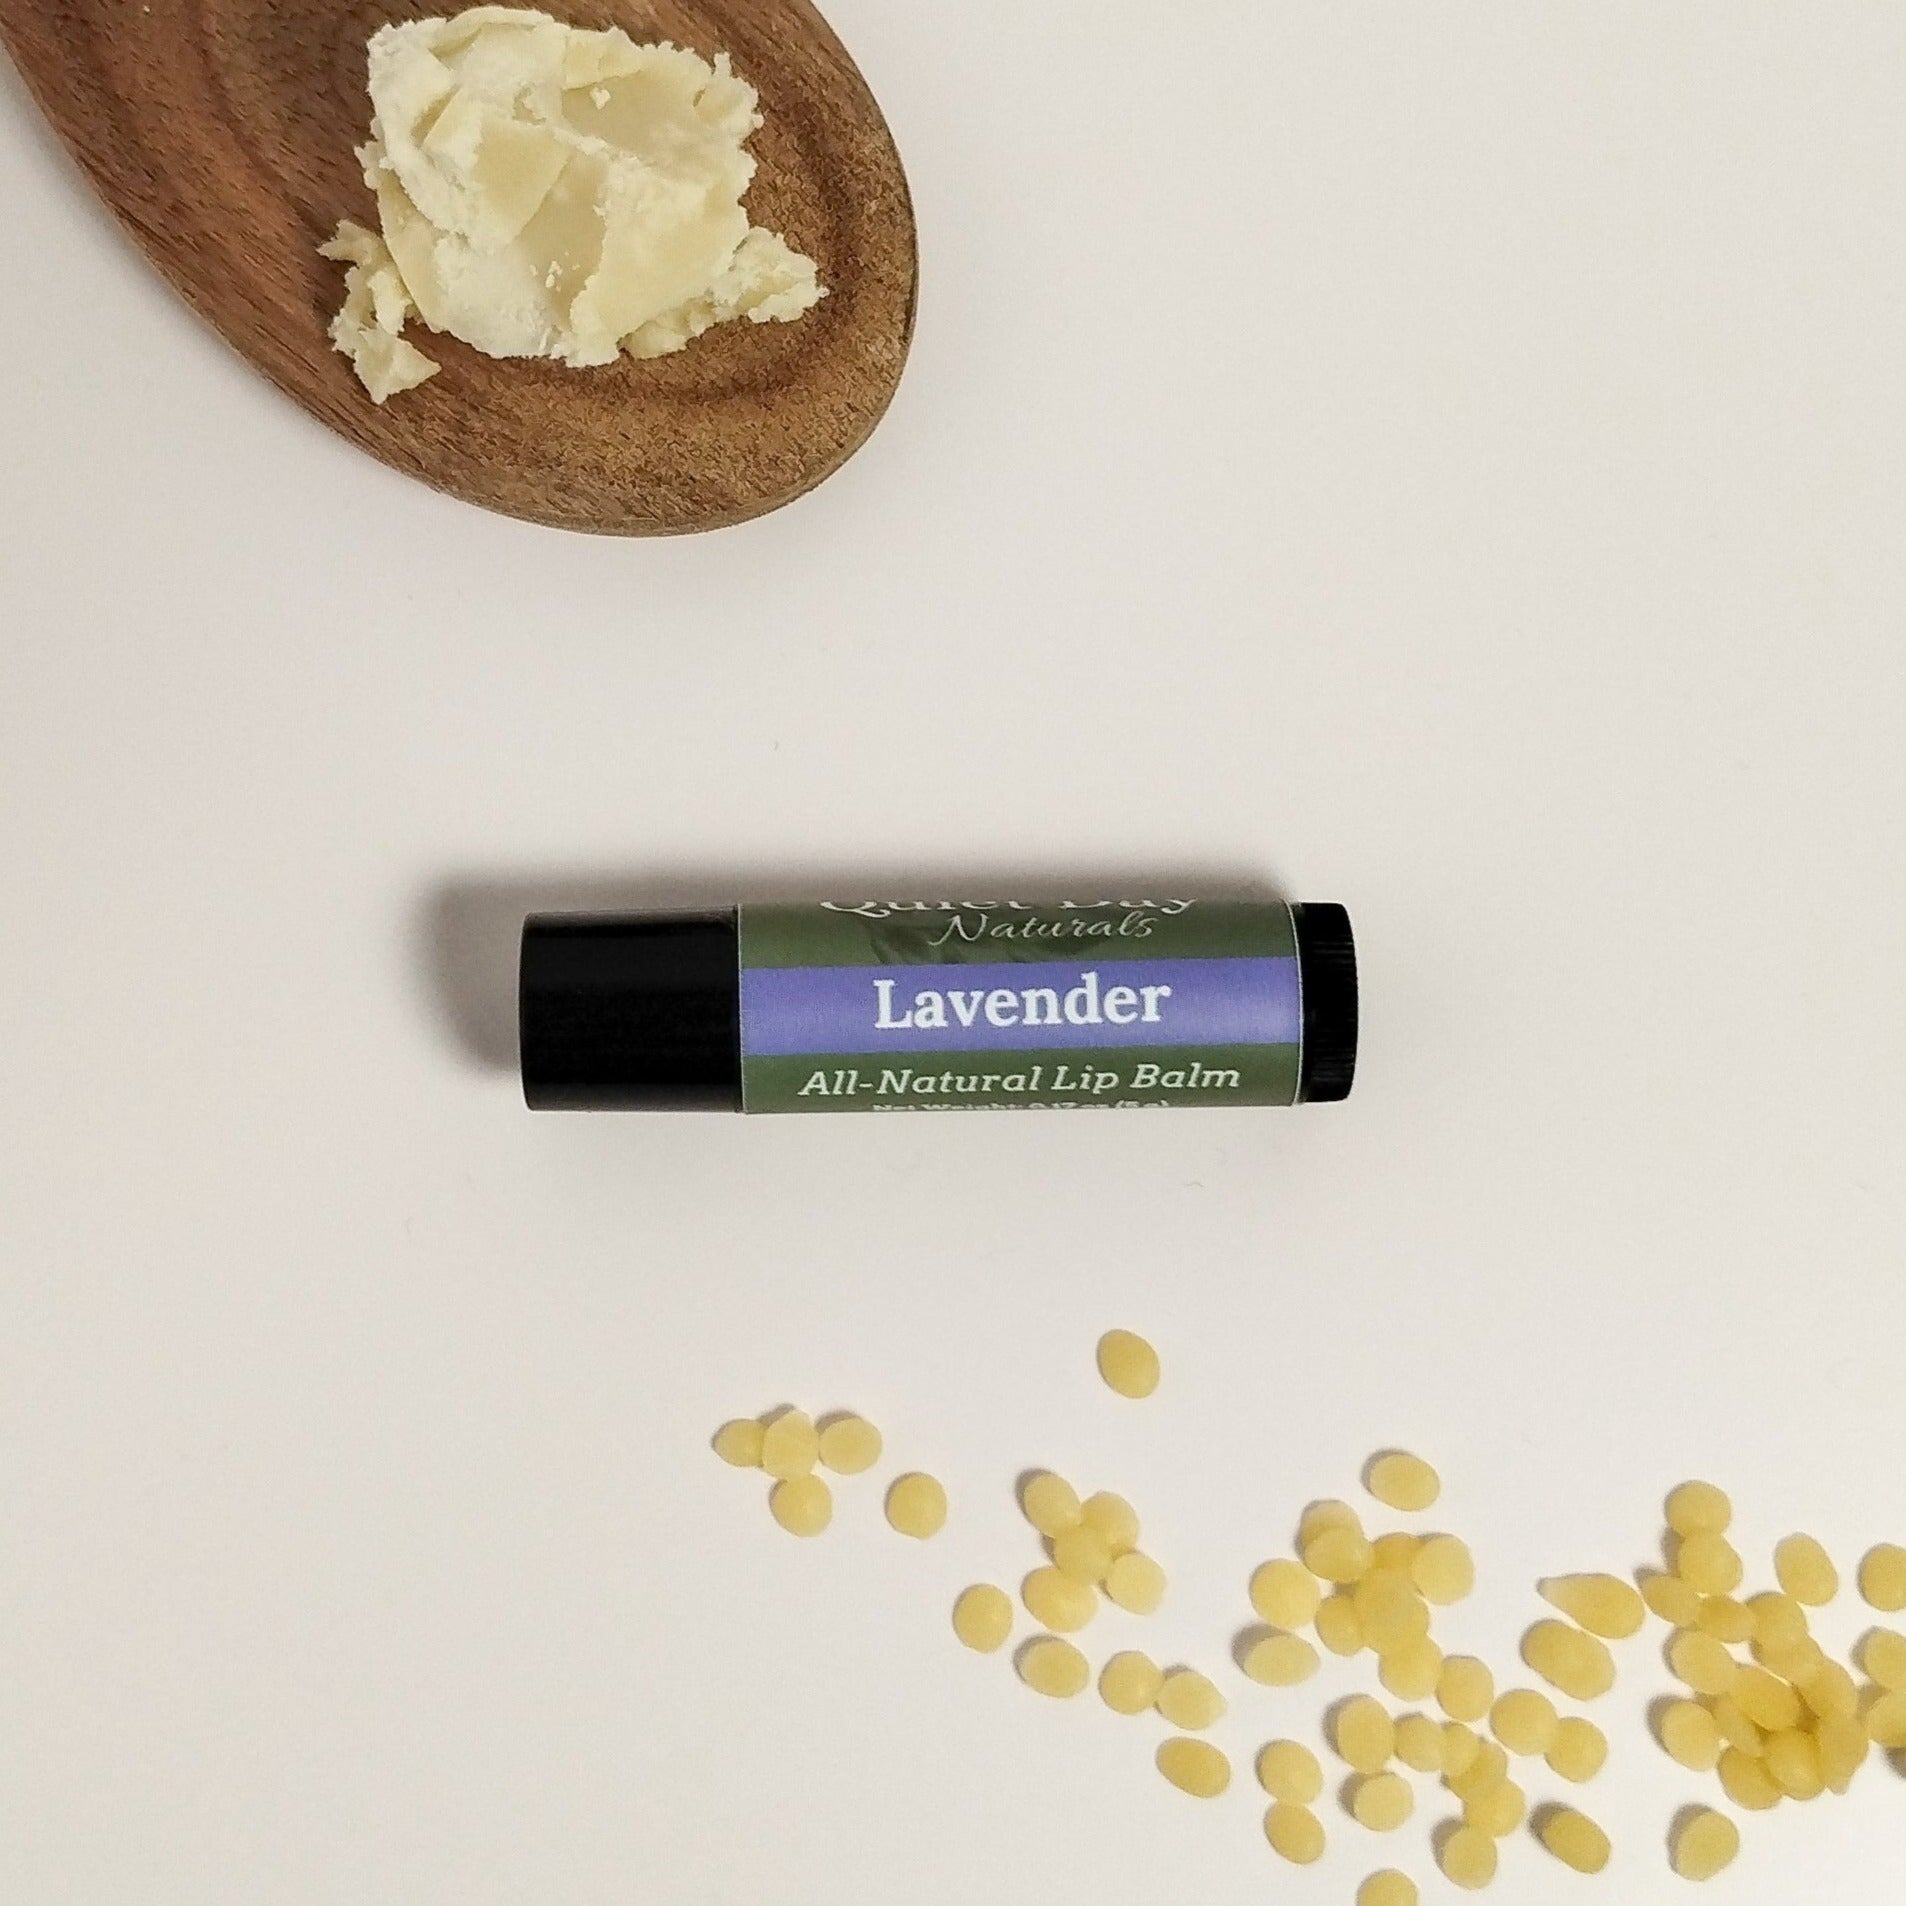 Lavender lip balm sitting on a white background with shea butter and beeswax around it.